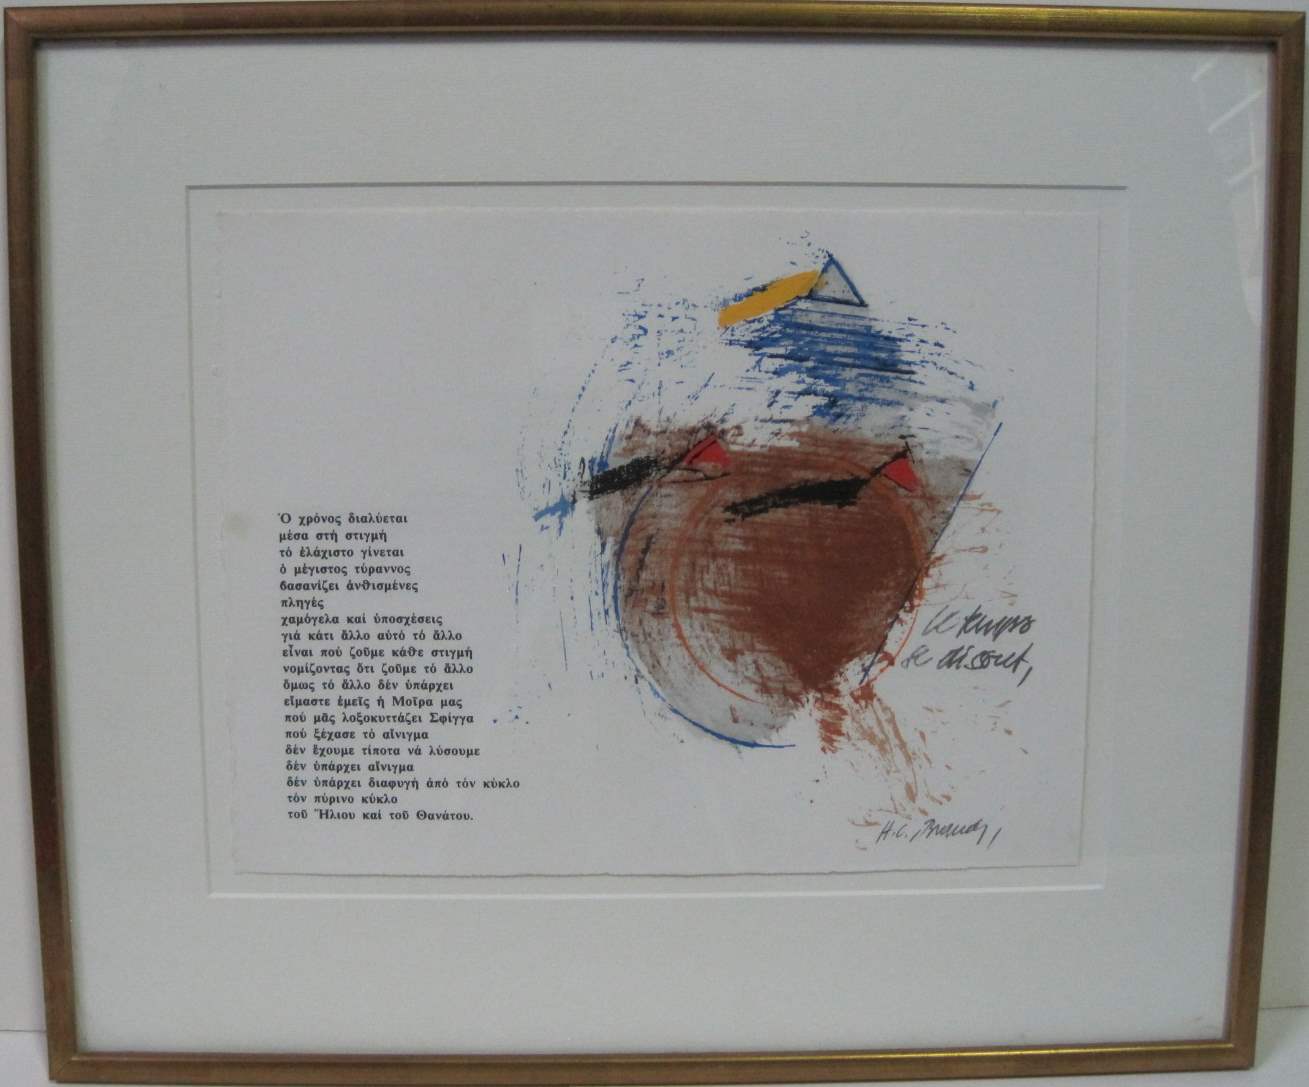 Robert BRANDY (born in 1946), Luxembourgish artist, pair of lithographs: Poem in [...]